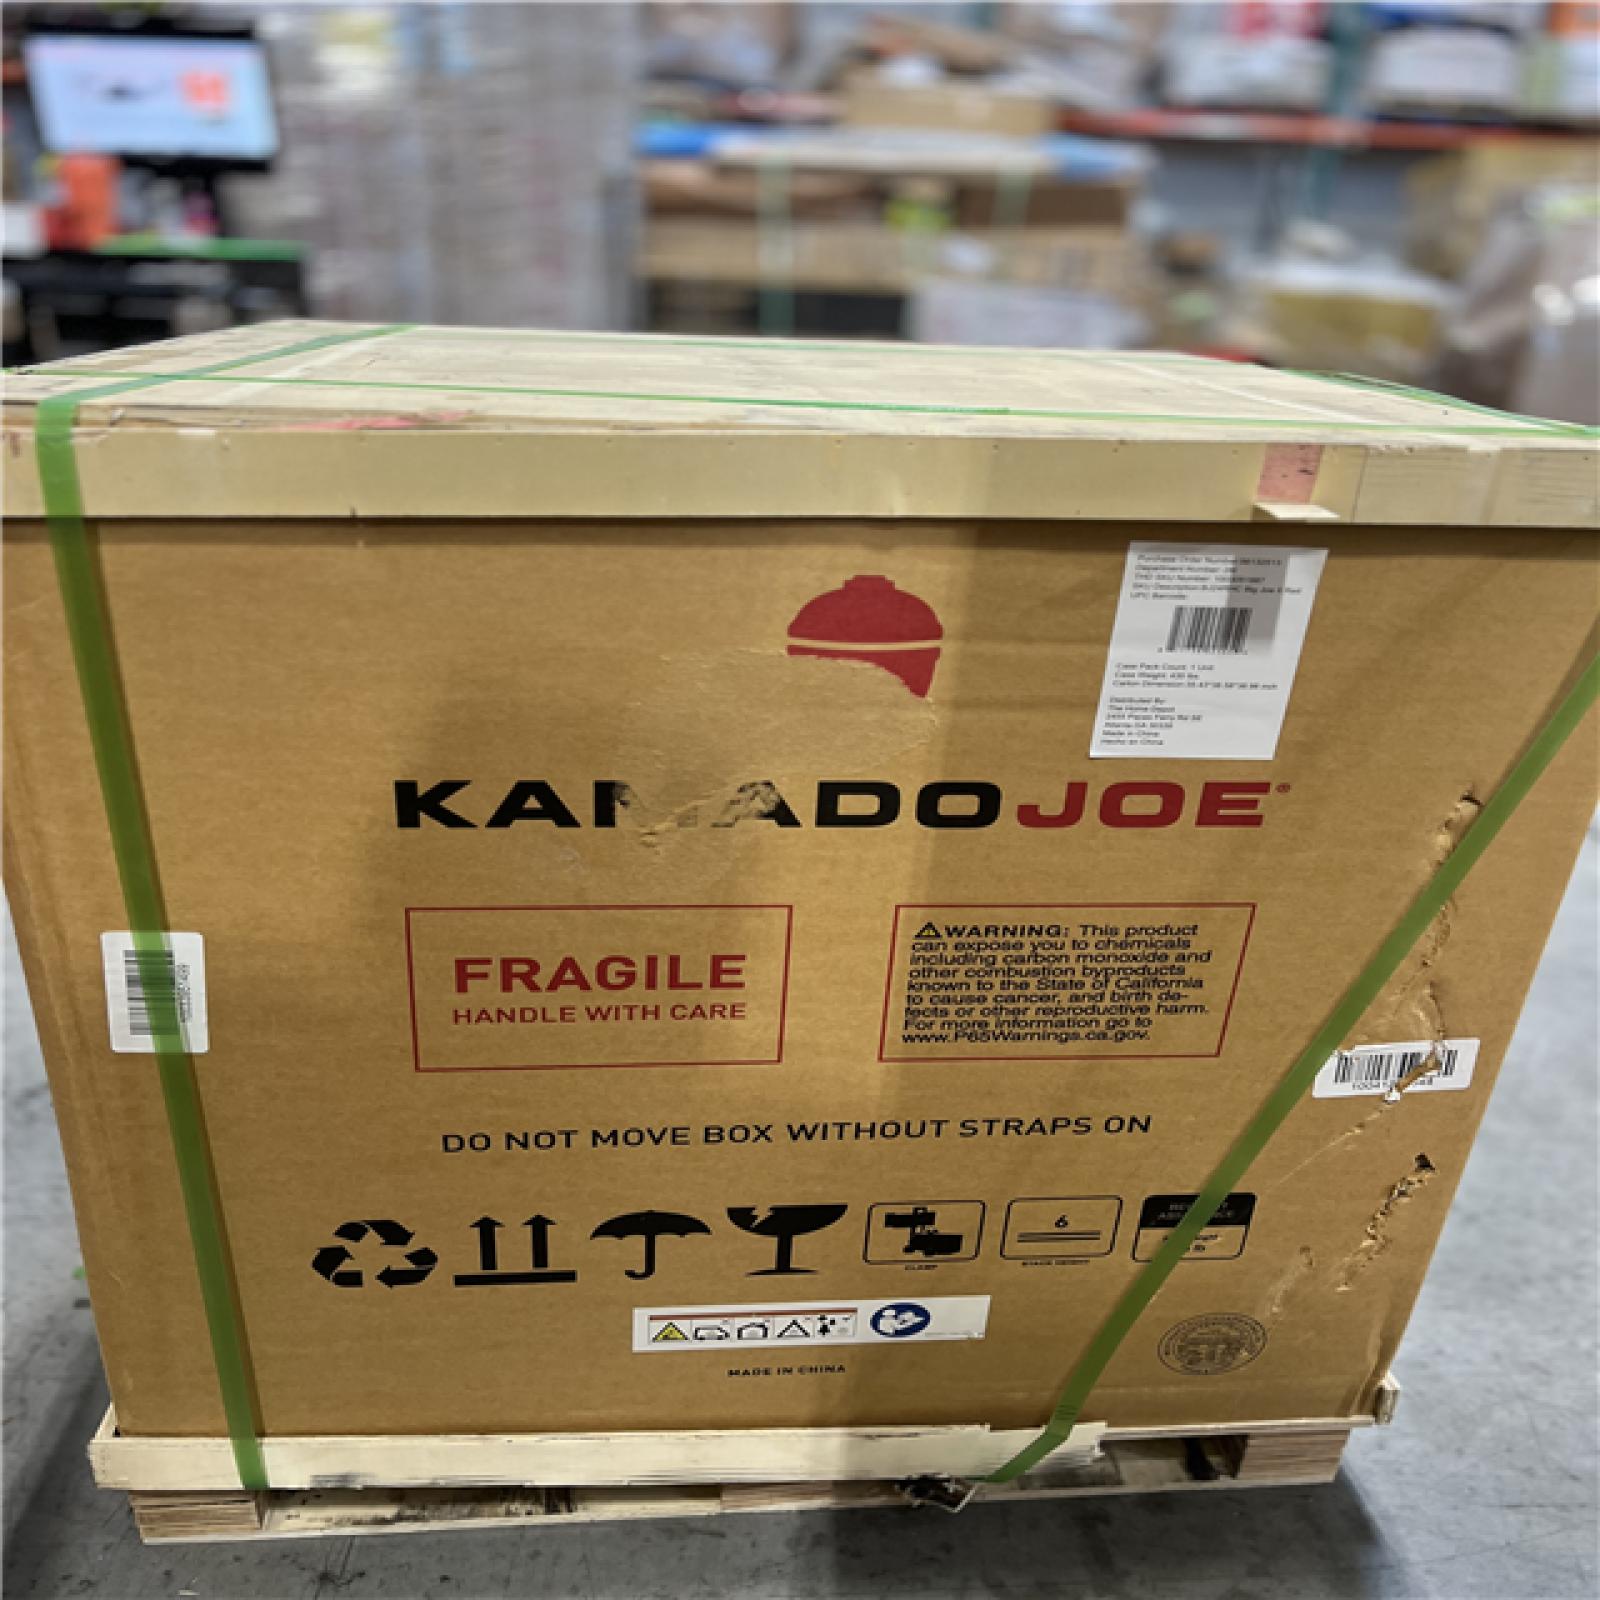 DALLAS LOCATION - Kamado Joe Big Joe II 24 in. Charcoal Grill in Red with Cart, Side Shelves, Grate Gripper, and Ash Tool